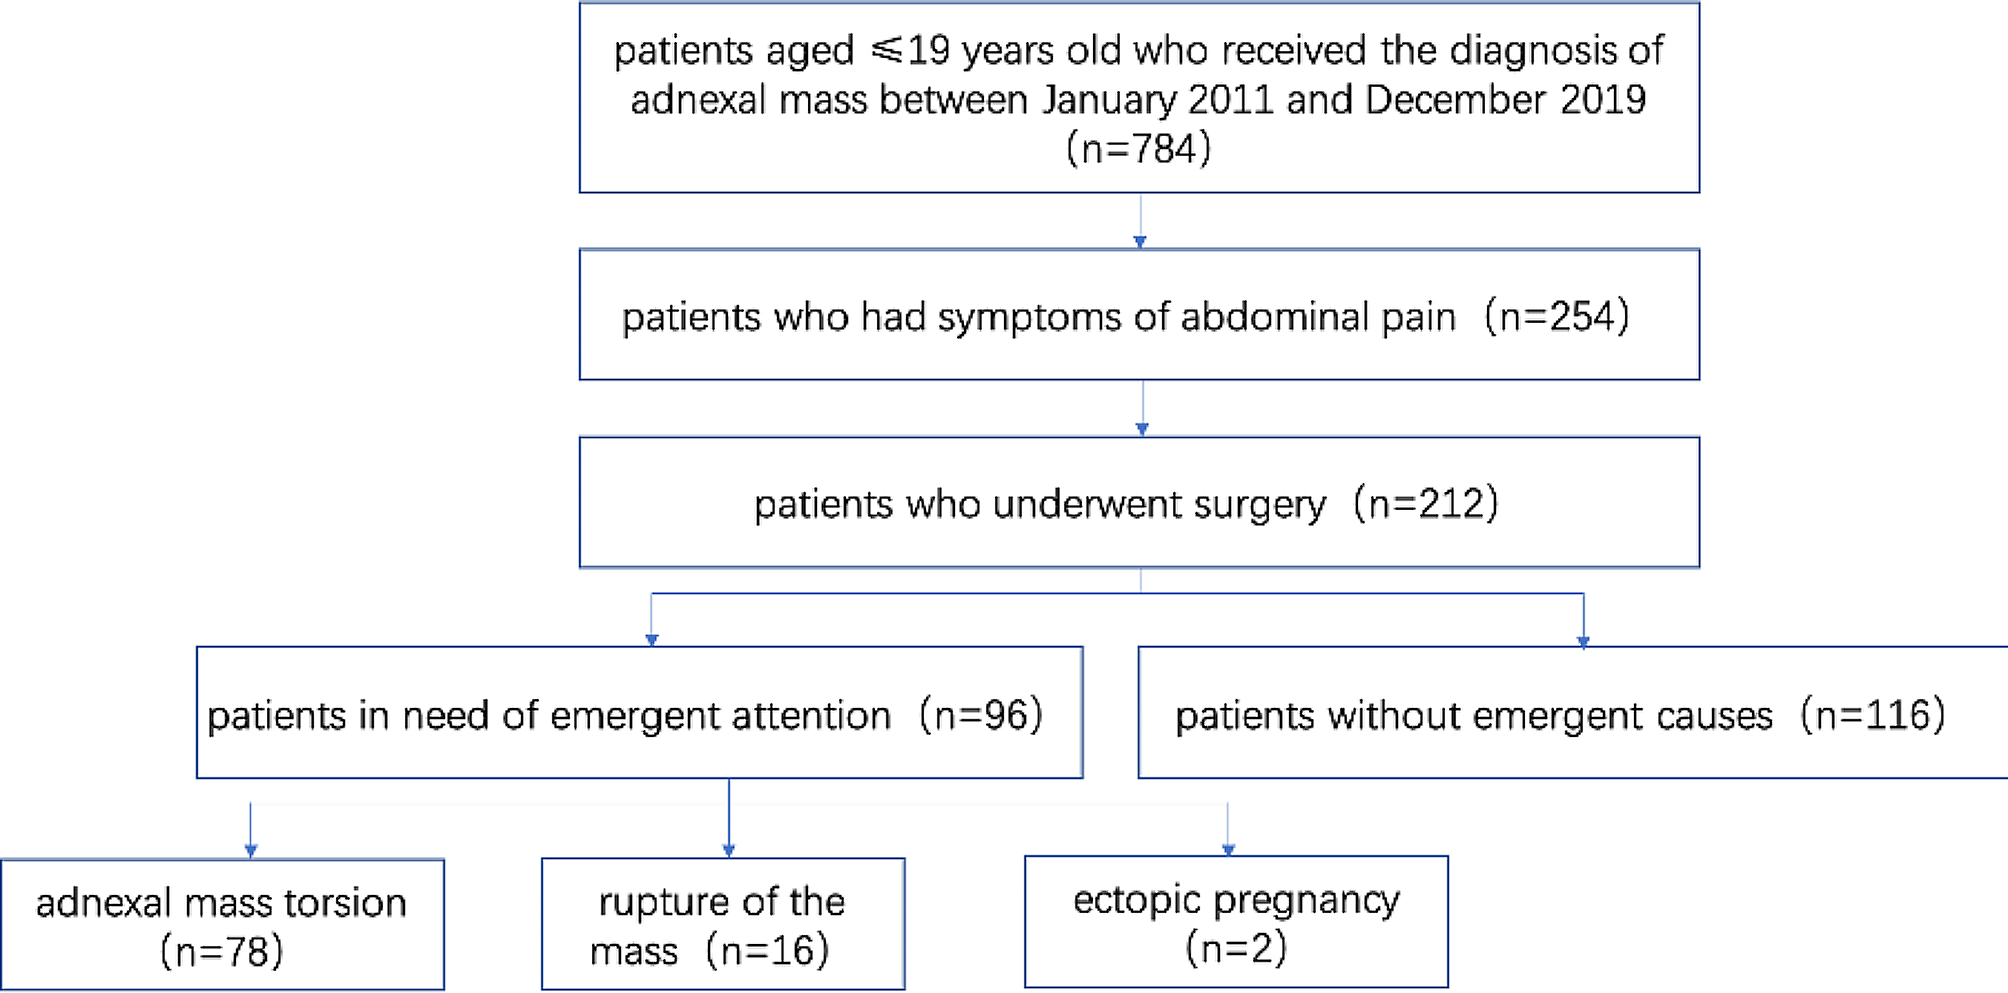 Clinicopathological features and surgical procedures of adnexal masses with abdominal pain in pediatric and adolescent patients